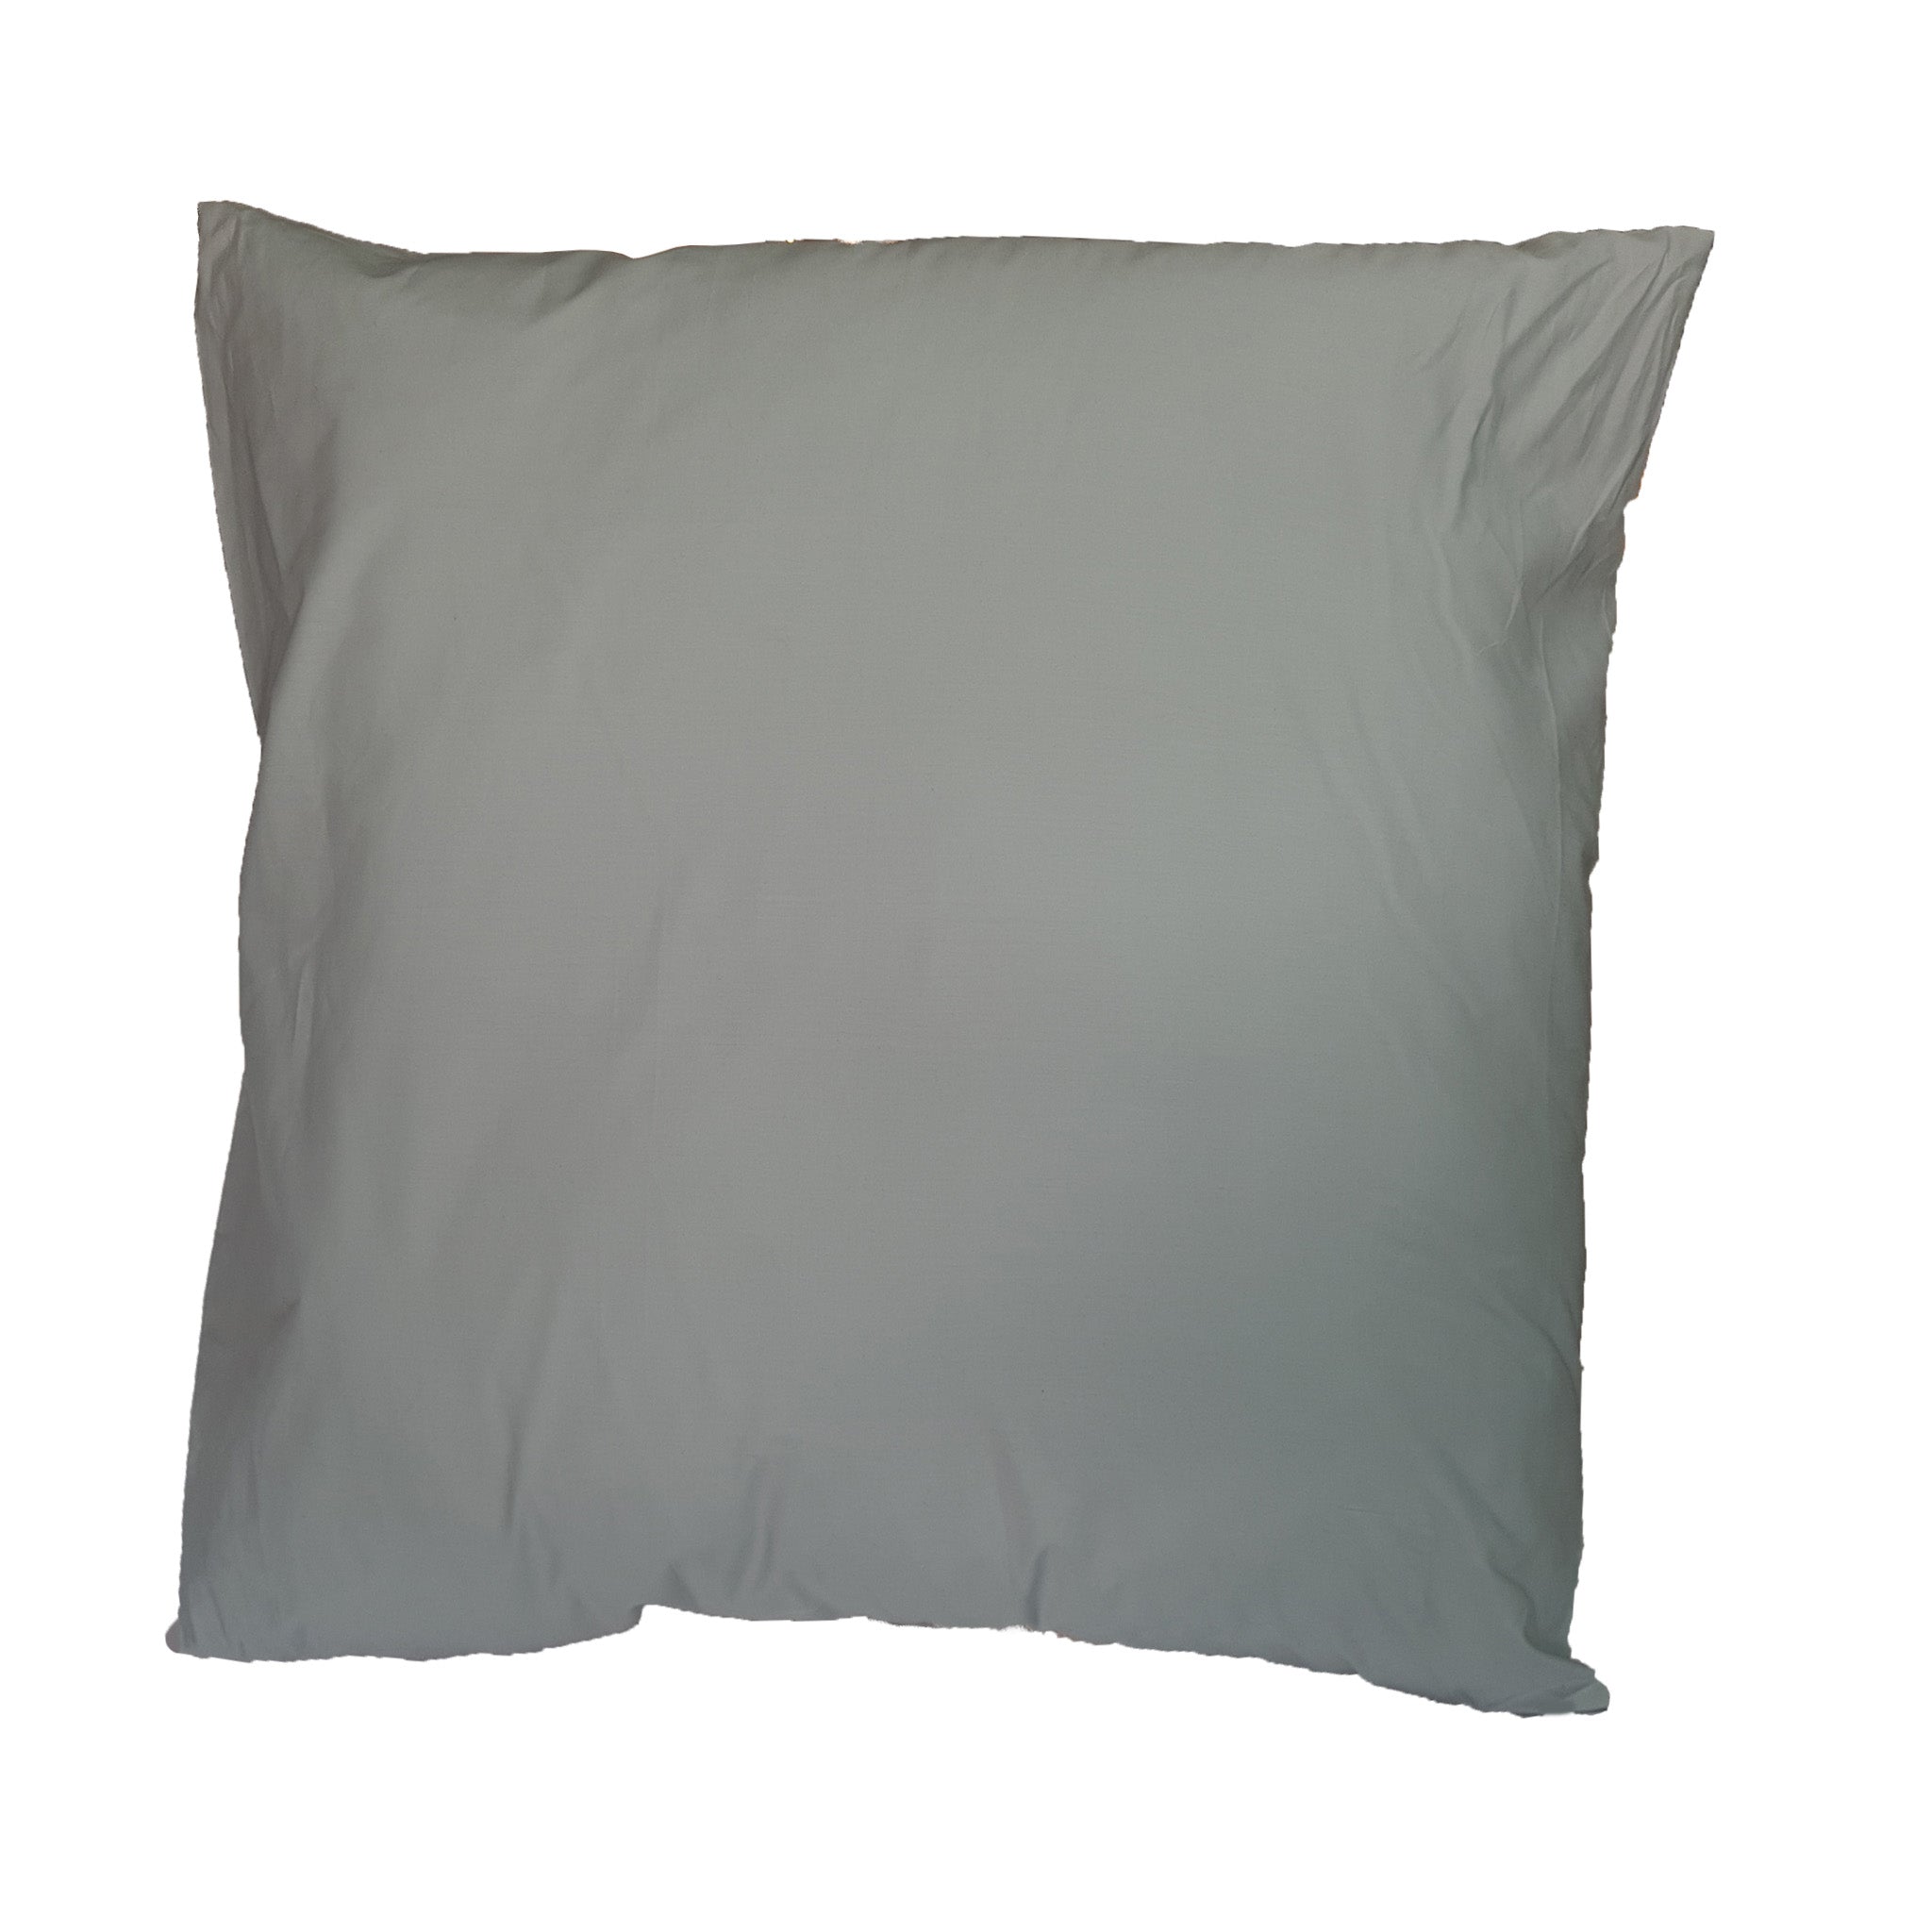 Continental Pillow Cases - T200 Cotton Percale